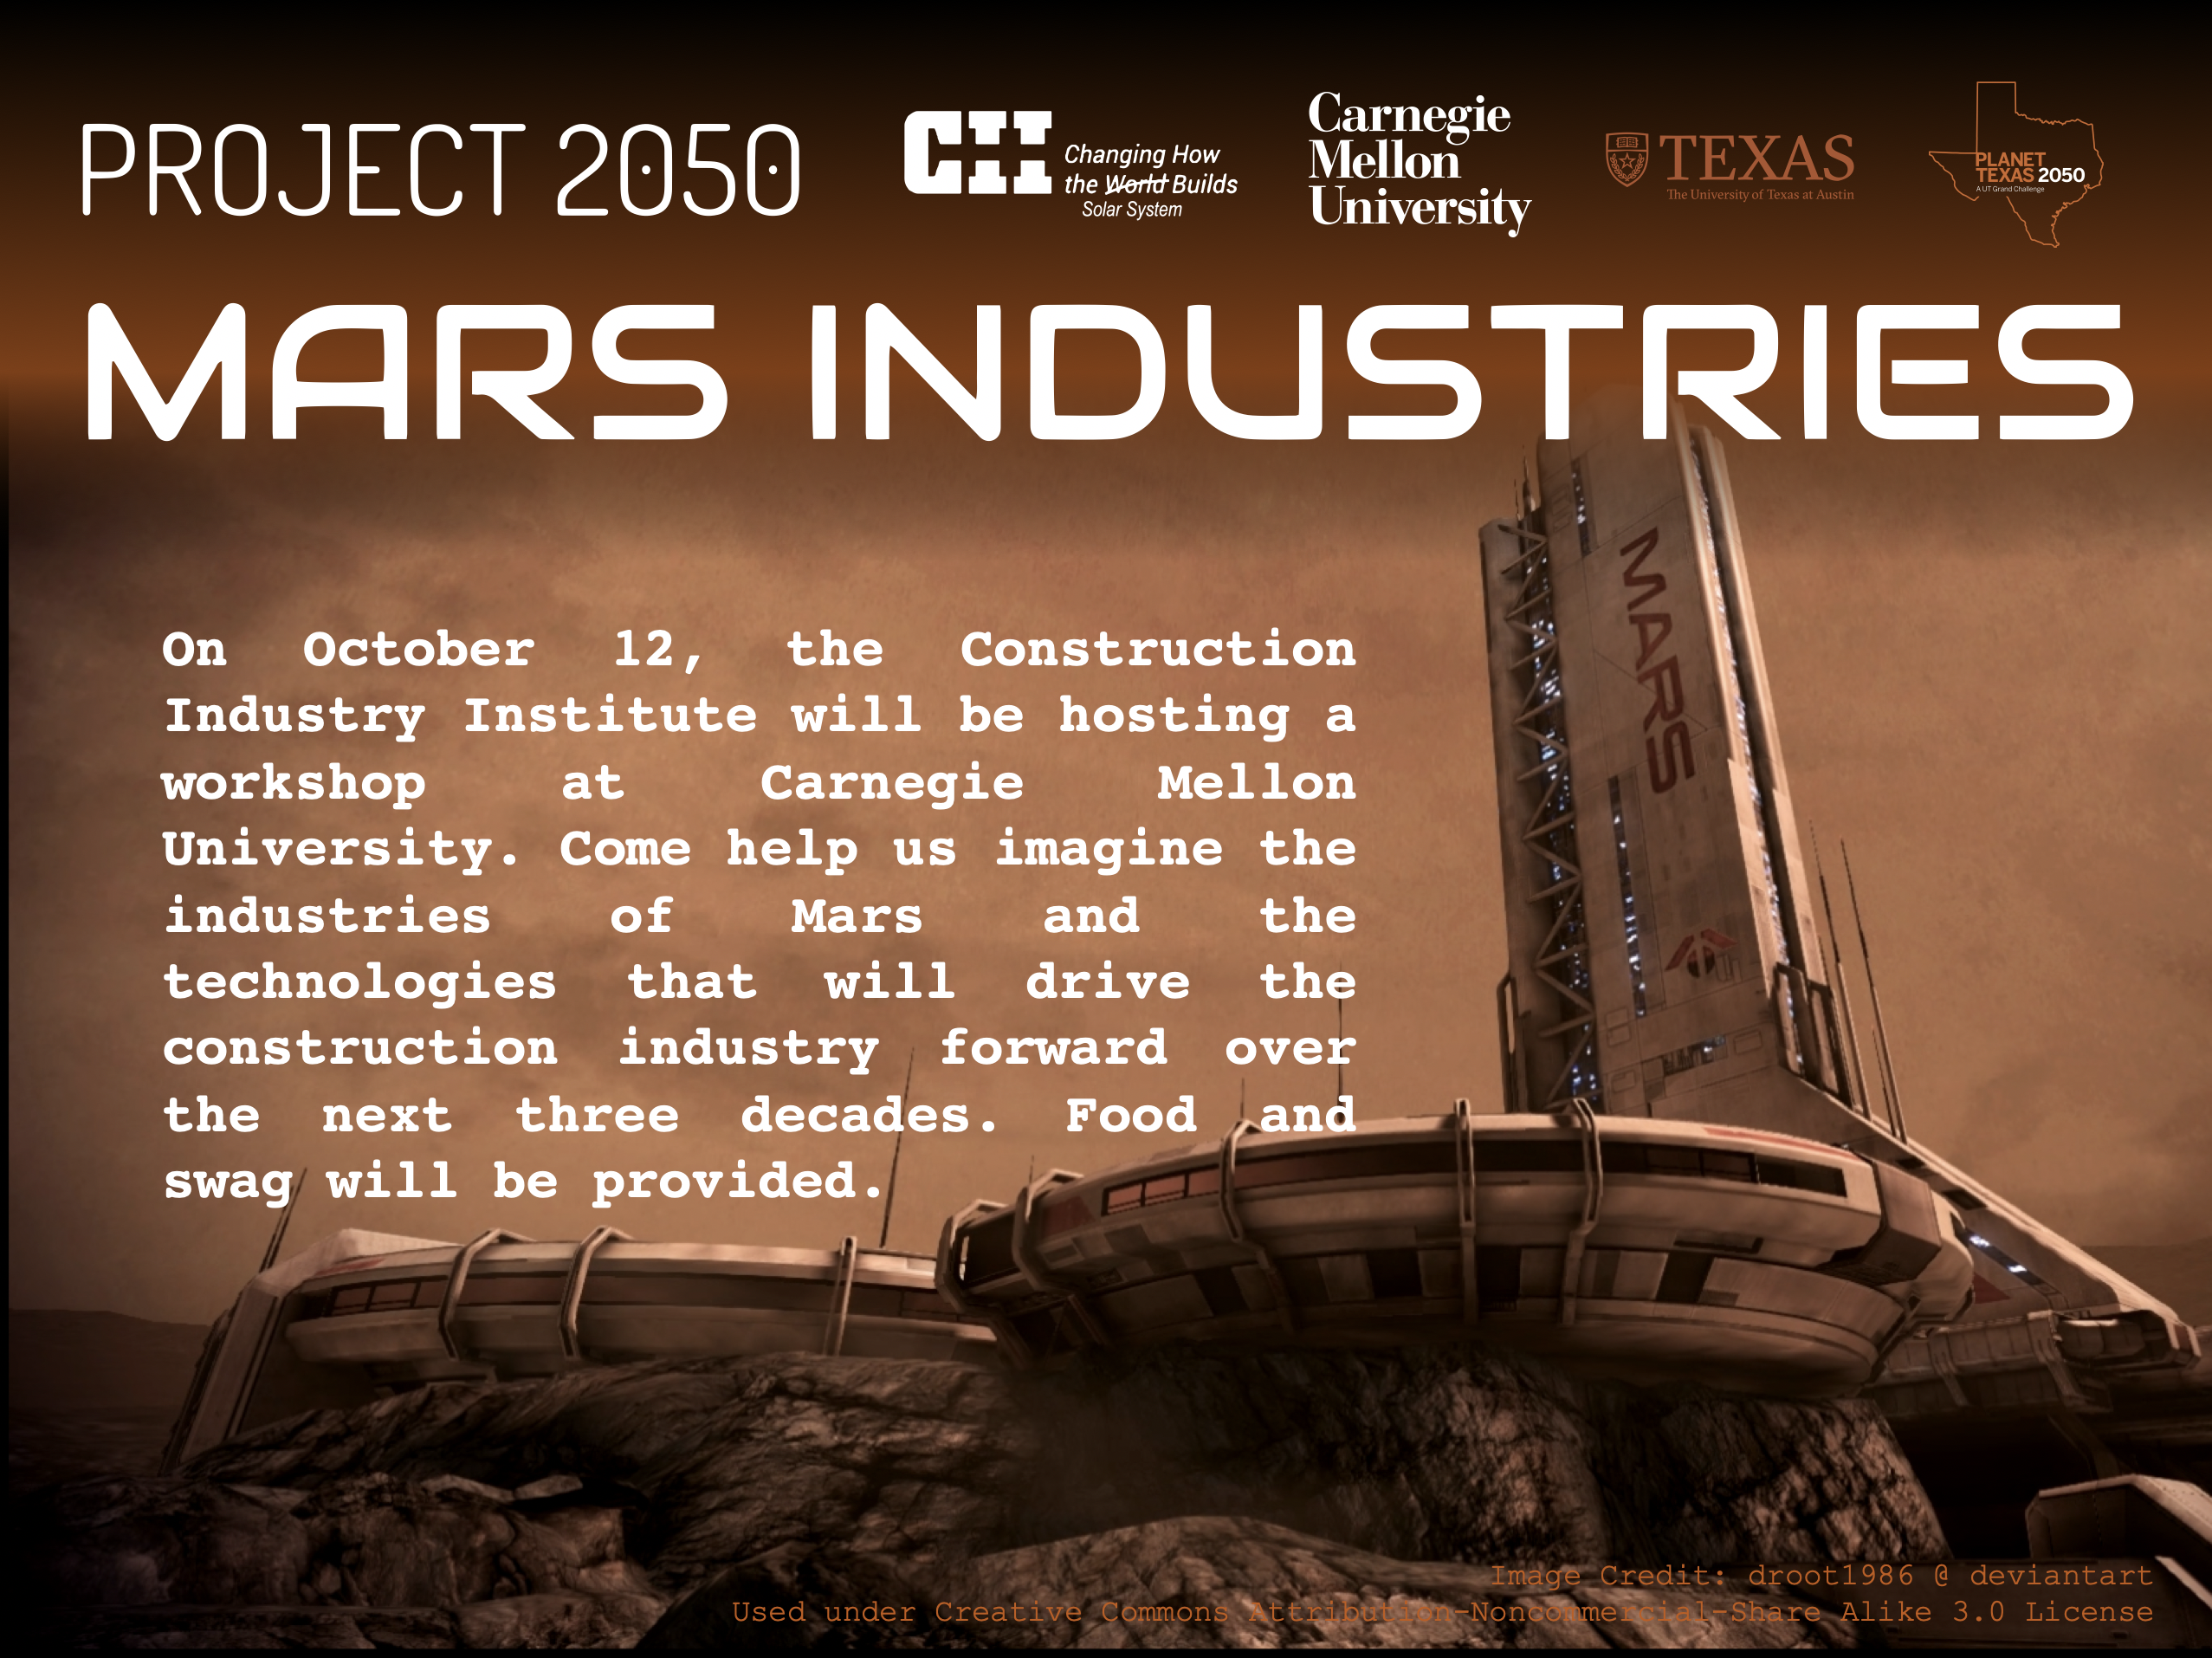 MARS INDUSTRIES: PATH TO THE FUTURE WORKSHOP